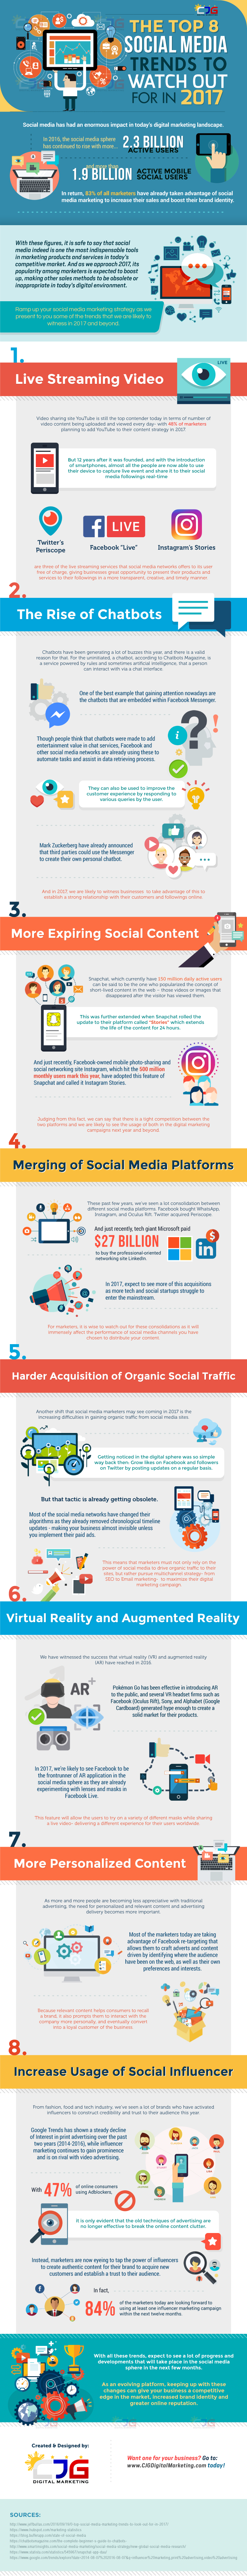 The Top 8 Hottest Social Media Marketing Trends in 2017 (Infographic) - An Infographic from CJG Digital Marketing